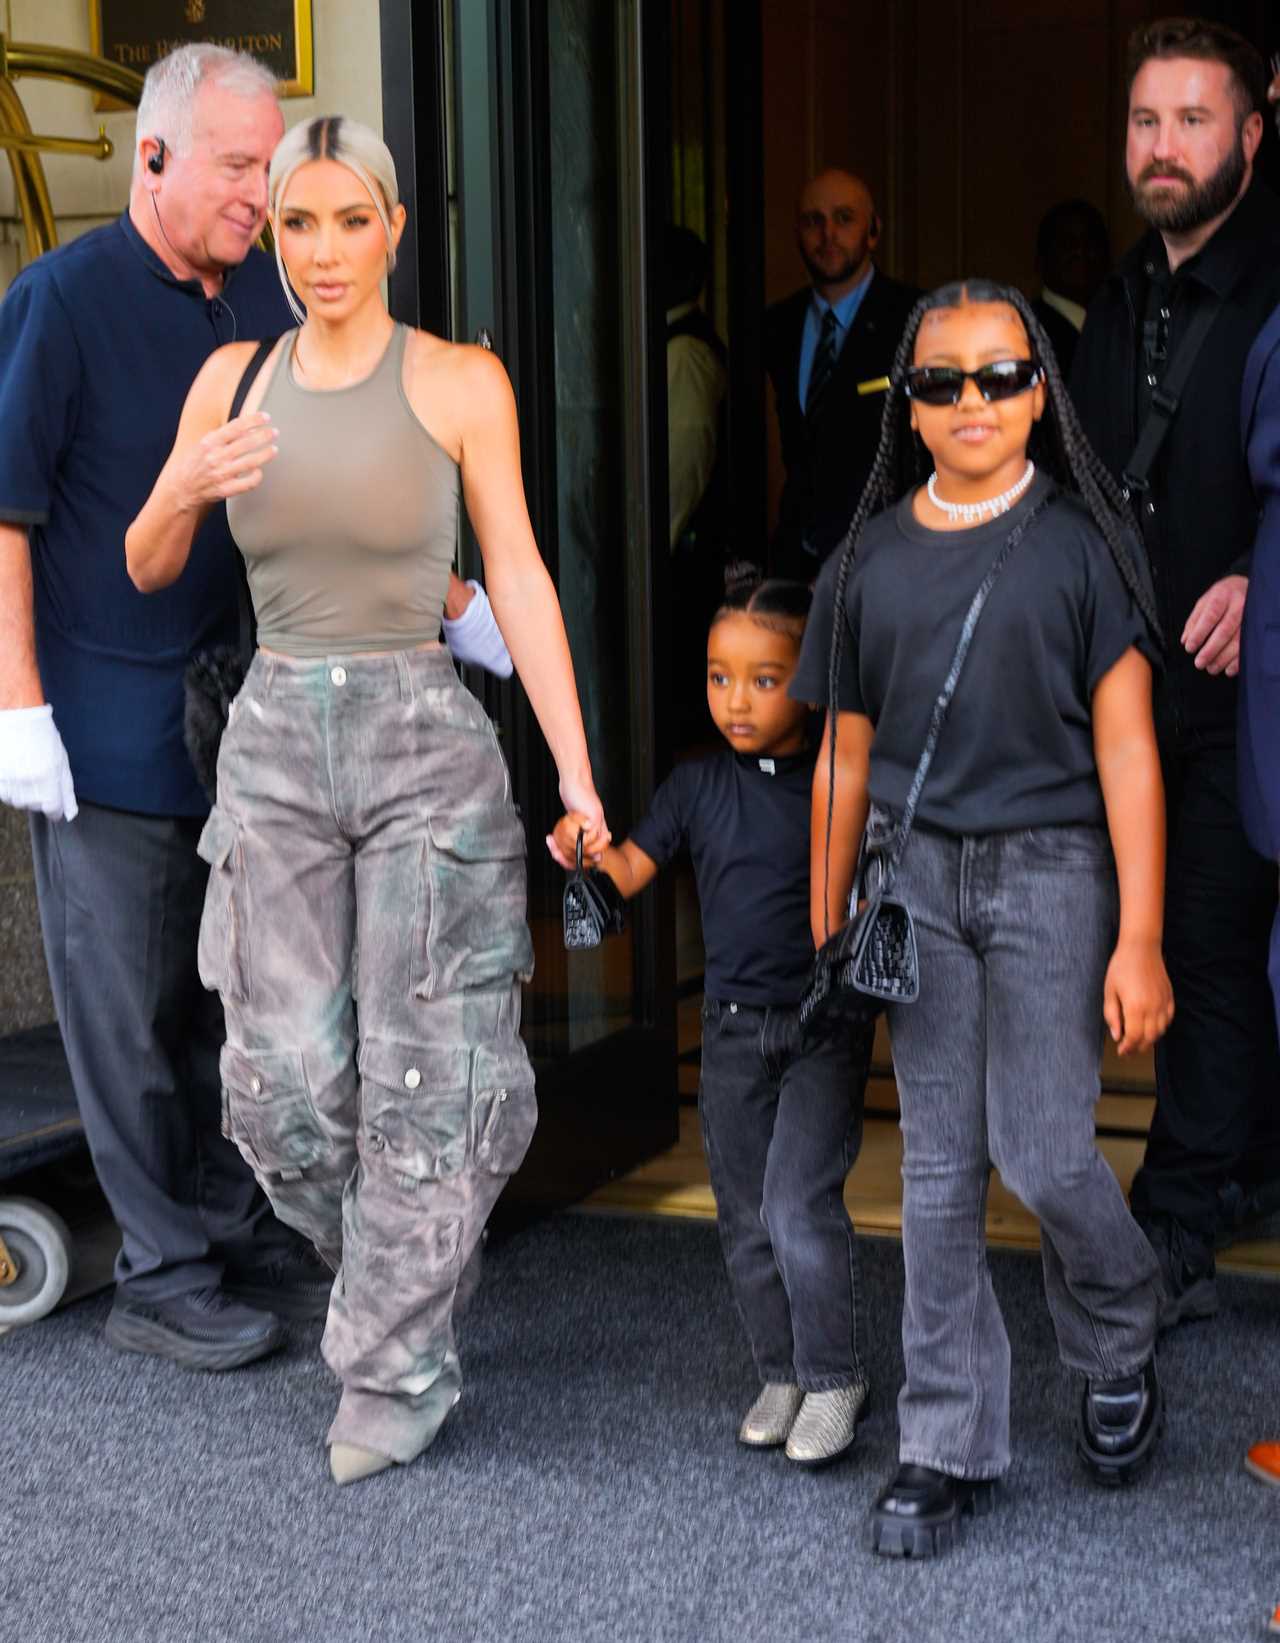 Kim Kardashian rolls her eyes and pouts in North West’s new TikTok after 9-year-old makes major complaint